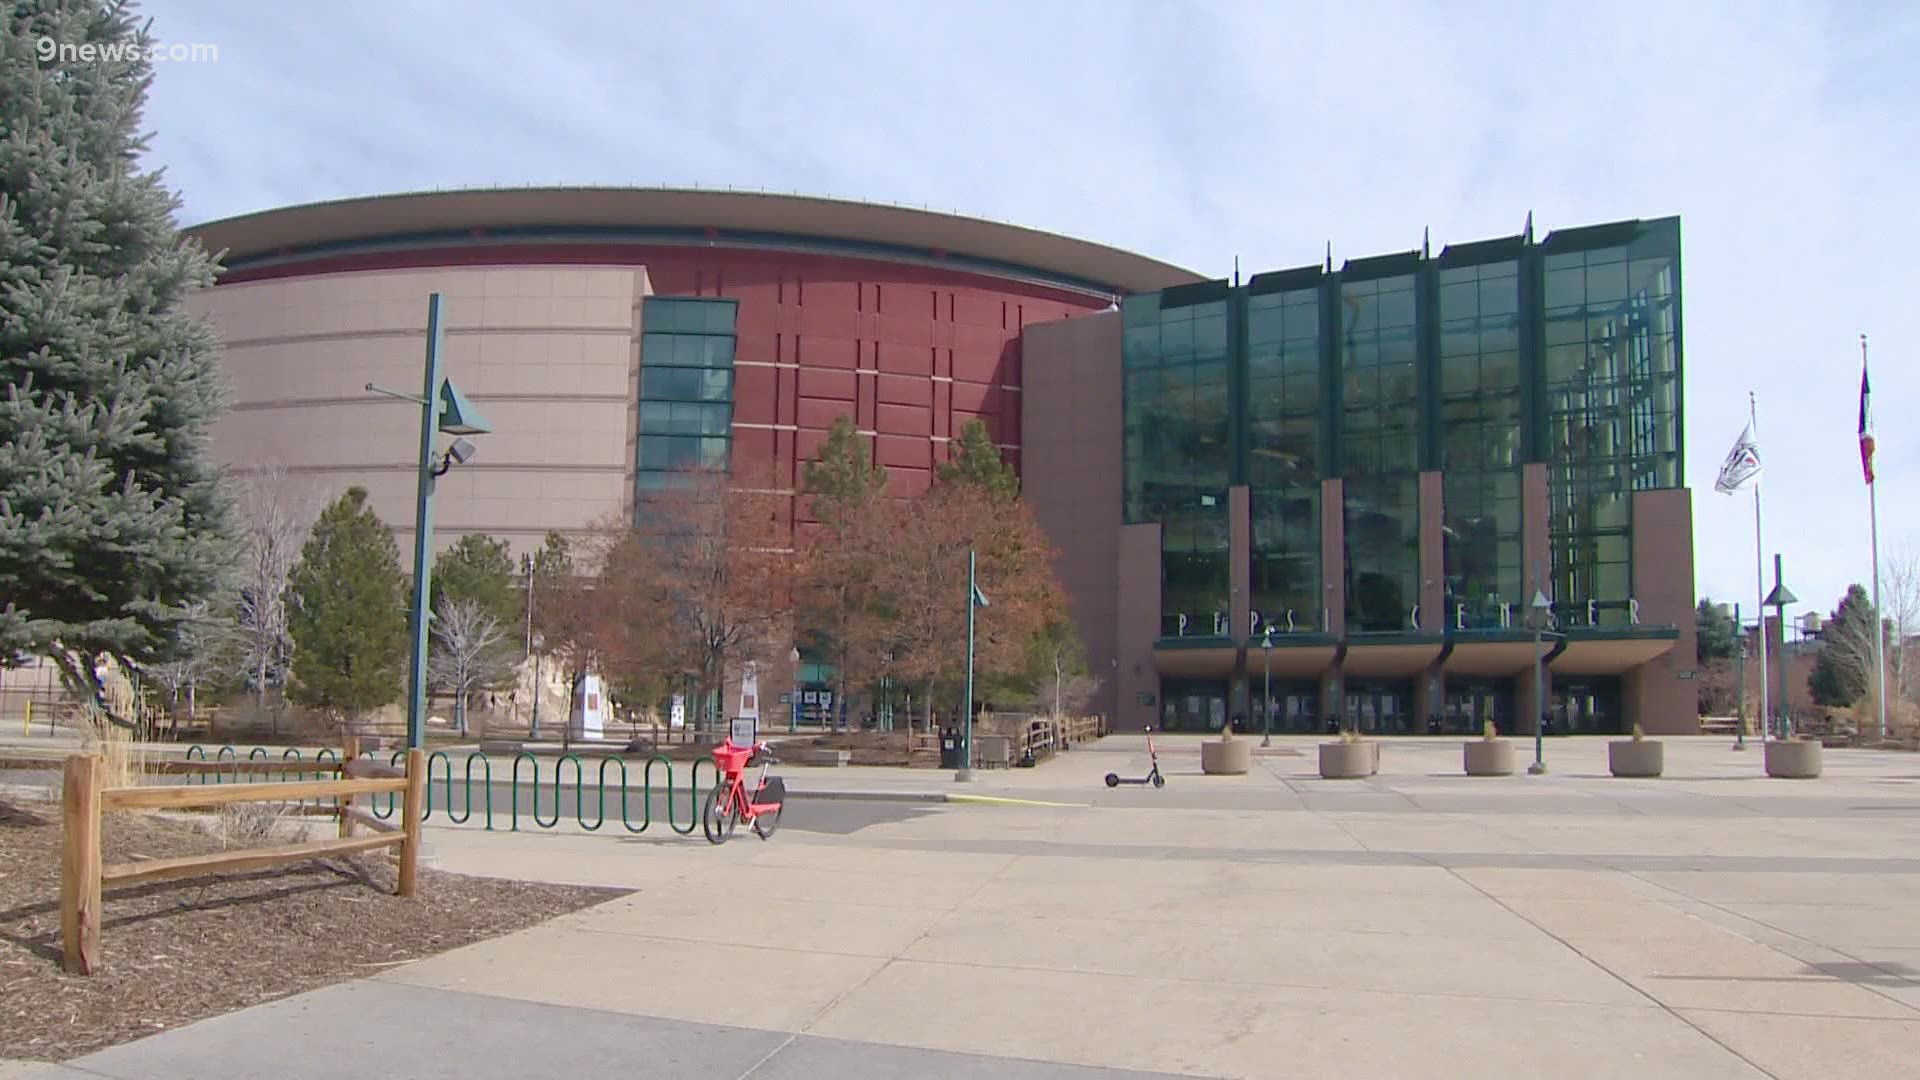 On Friday, the newly renamed arena that's home to the Nuggets and Avs will become one of Denver's 36 vote centers.